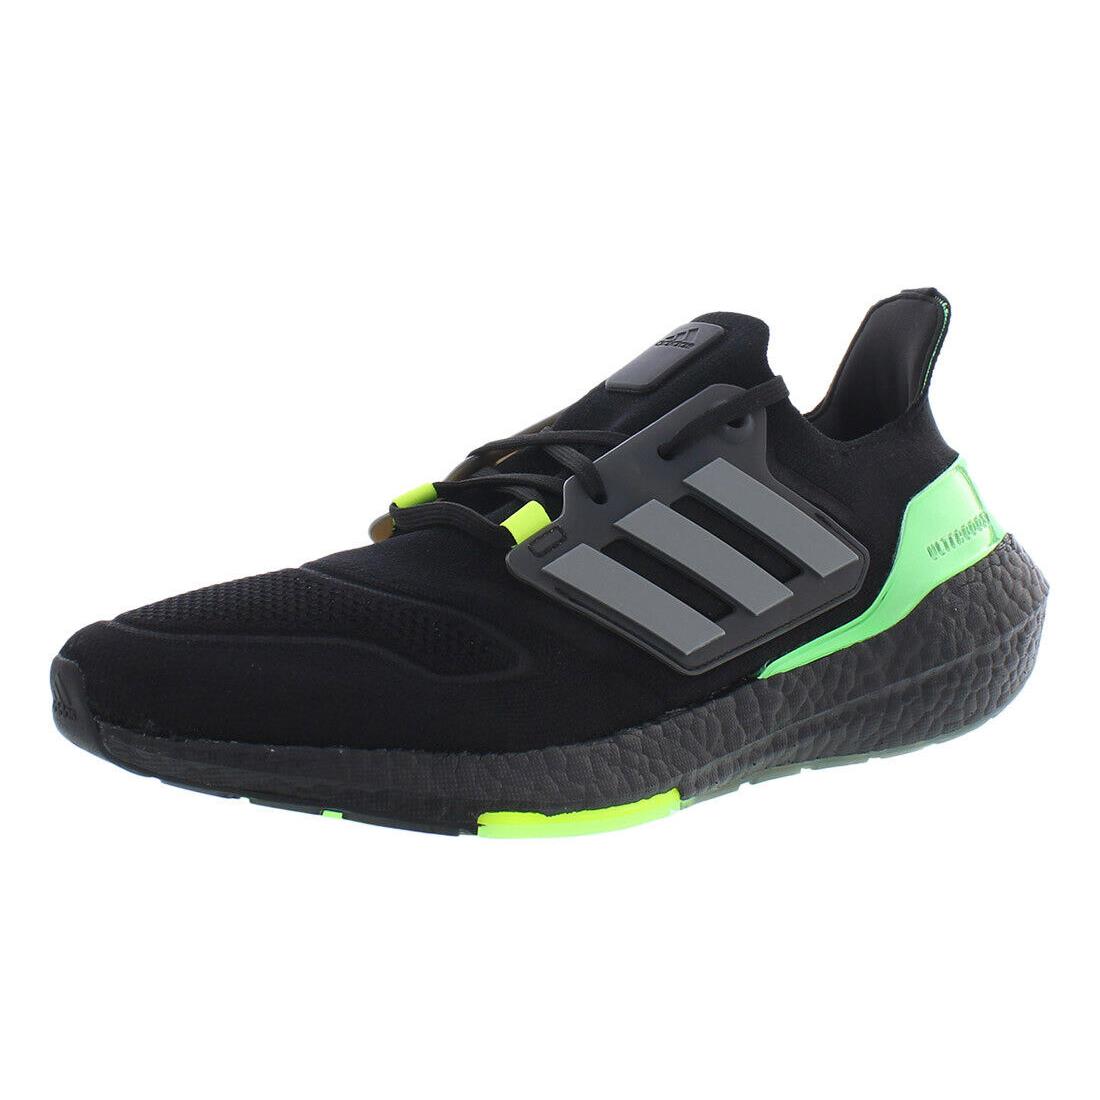 Adidas Ultraboost 22 Mens Shoes Size 7.5 Color: Core Black/iron Metallic/beam - Core Black/Iron Metallic/Beam Green, Main: Black